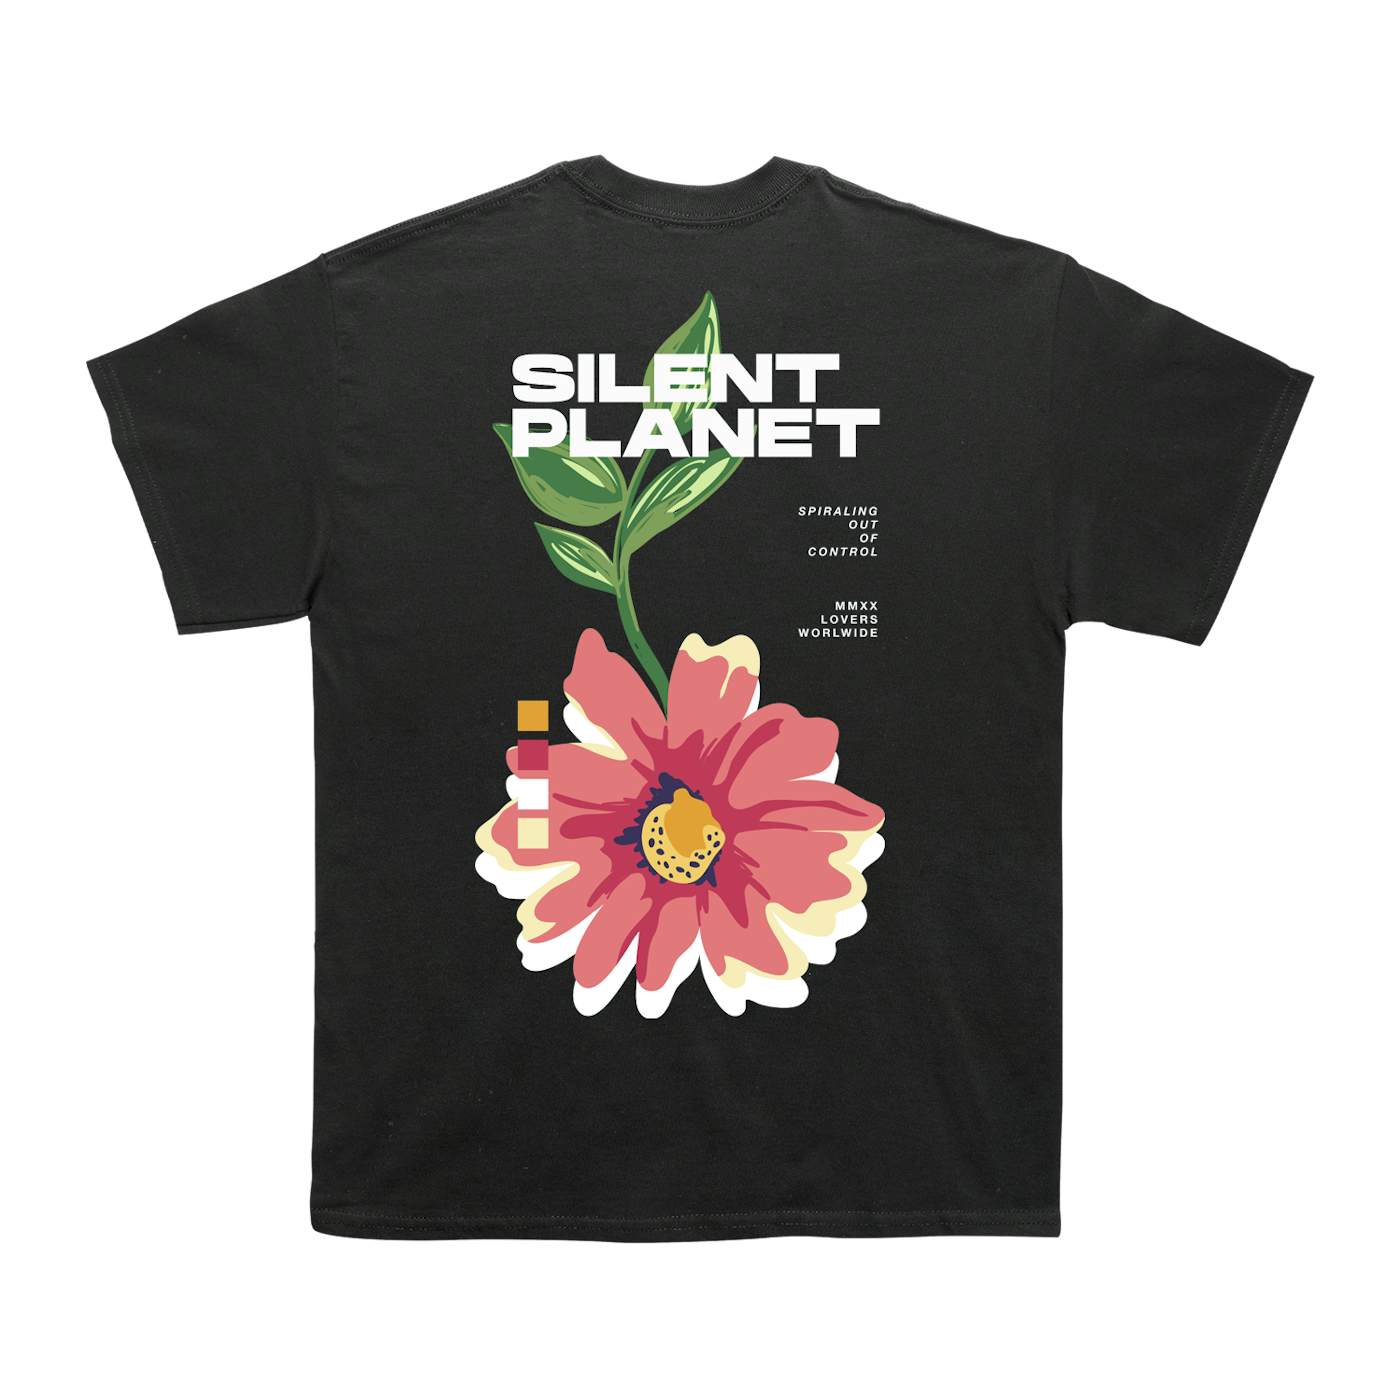 Silent Planet Spiraling Out of Control Tee